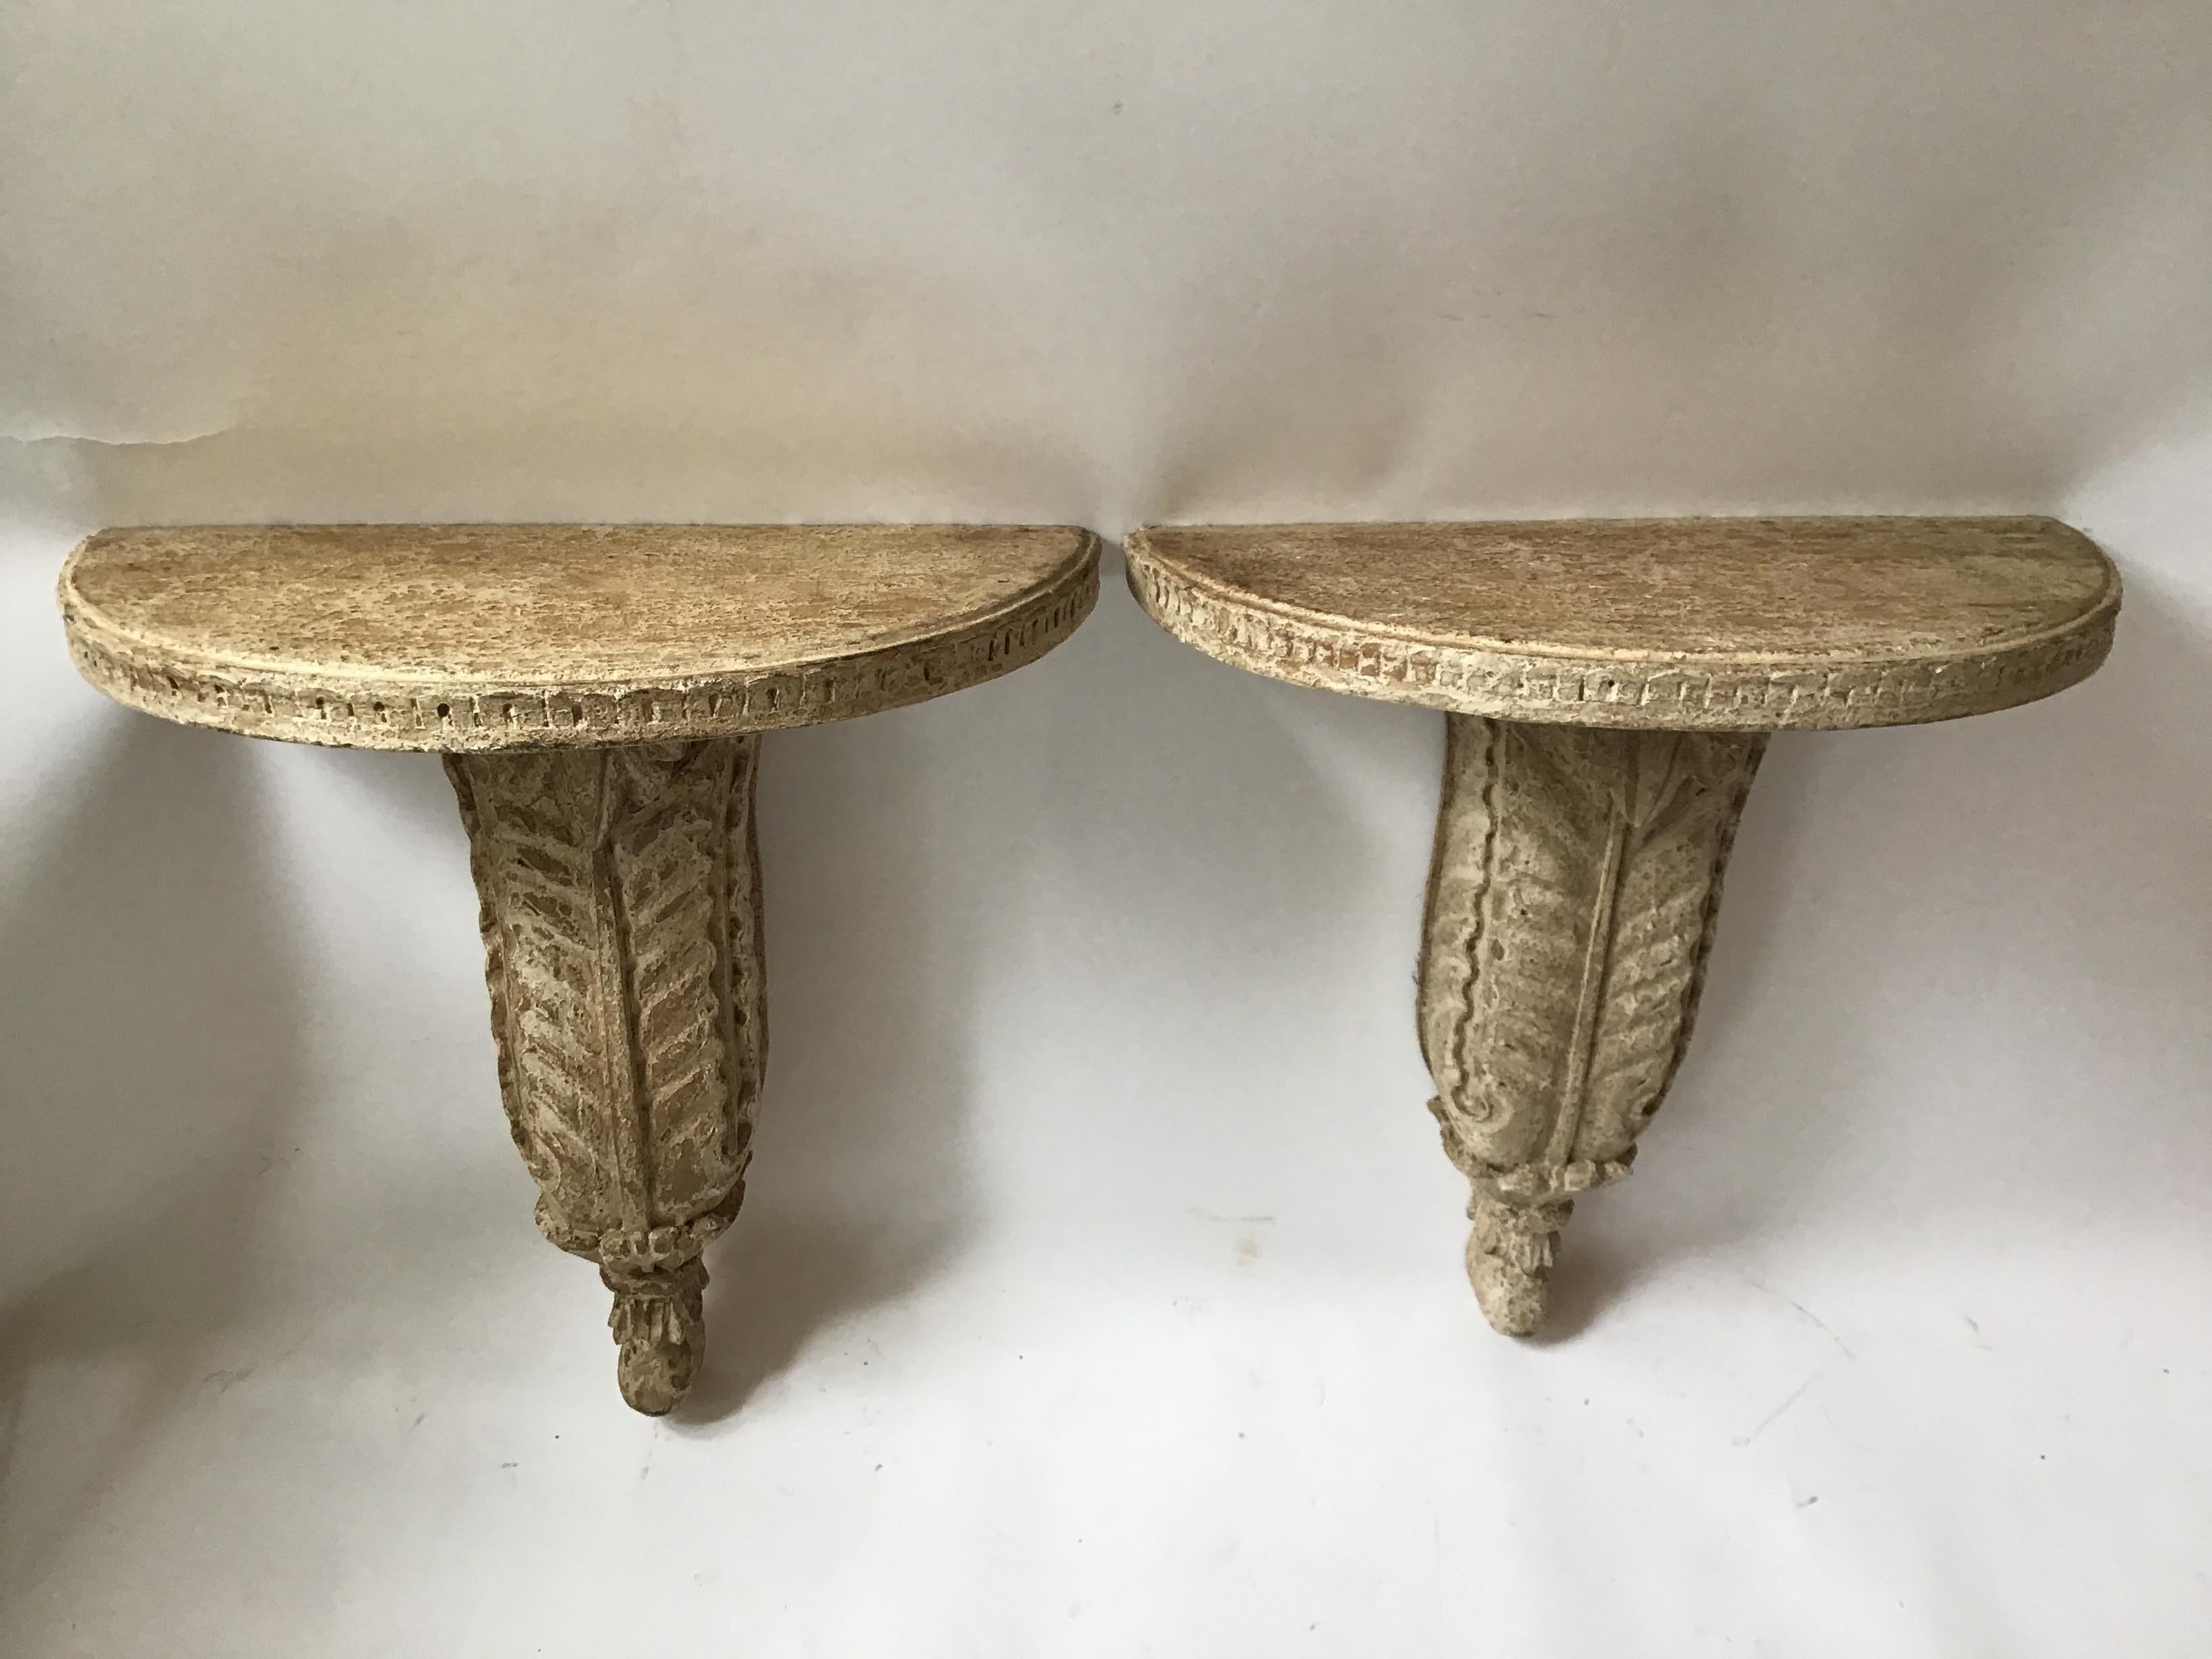 Pair of 1940s Hollywood Regency carved wood wall consoles. These consoles were found in a barn in Armonk, NY. Being in the barn for many years created this finish on the consoles that you see.